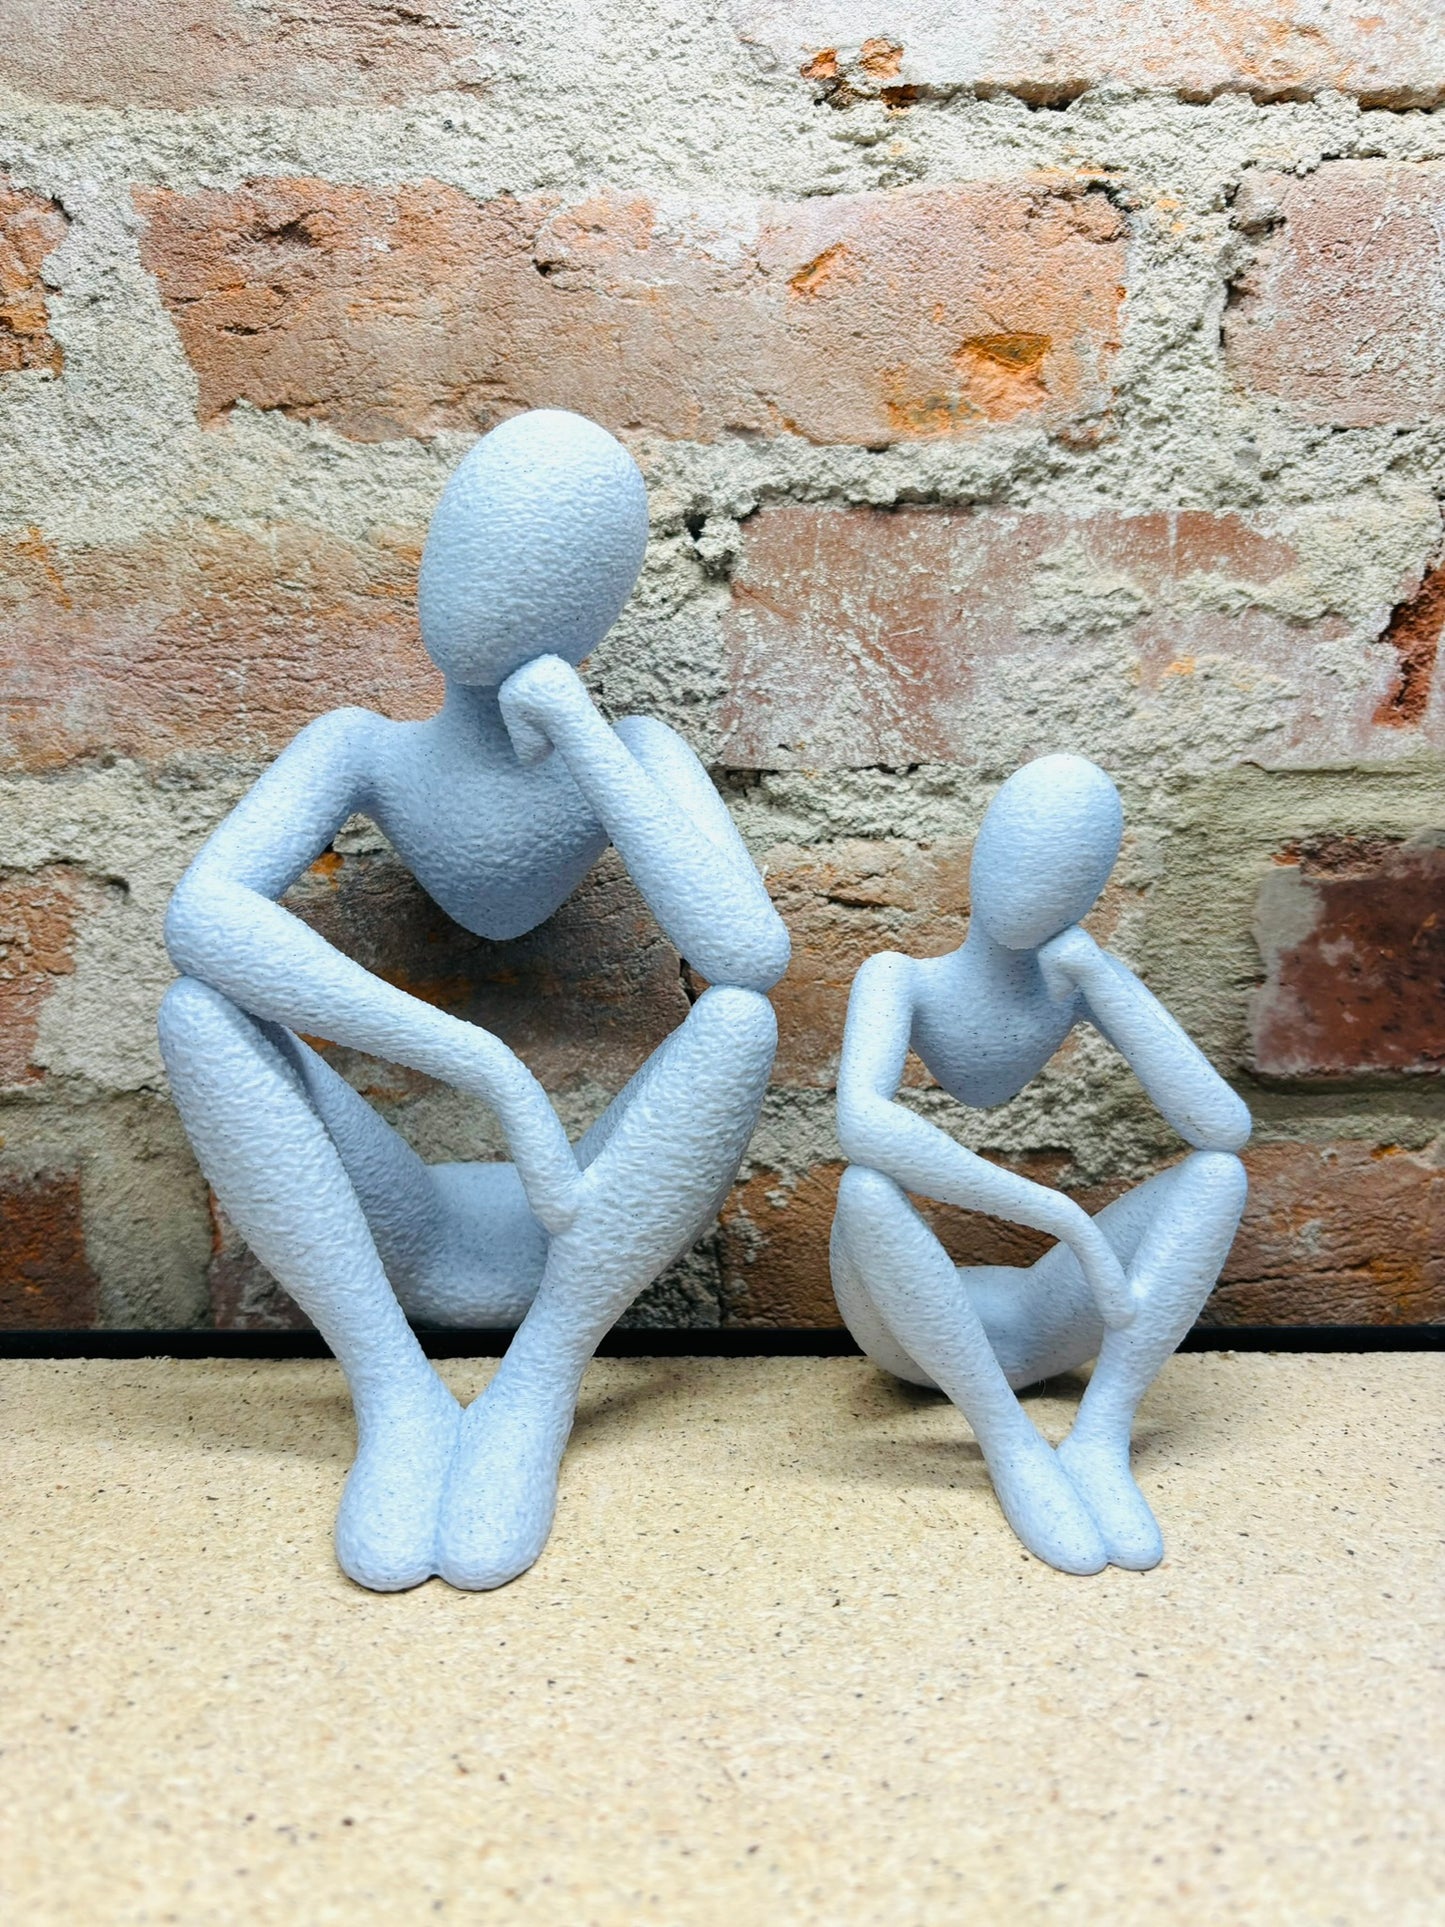 3D Printed Figures - Small